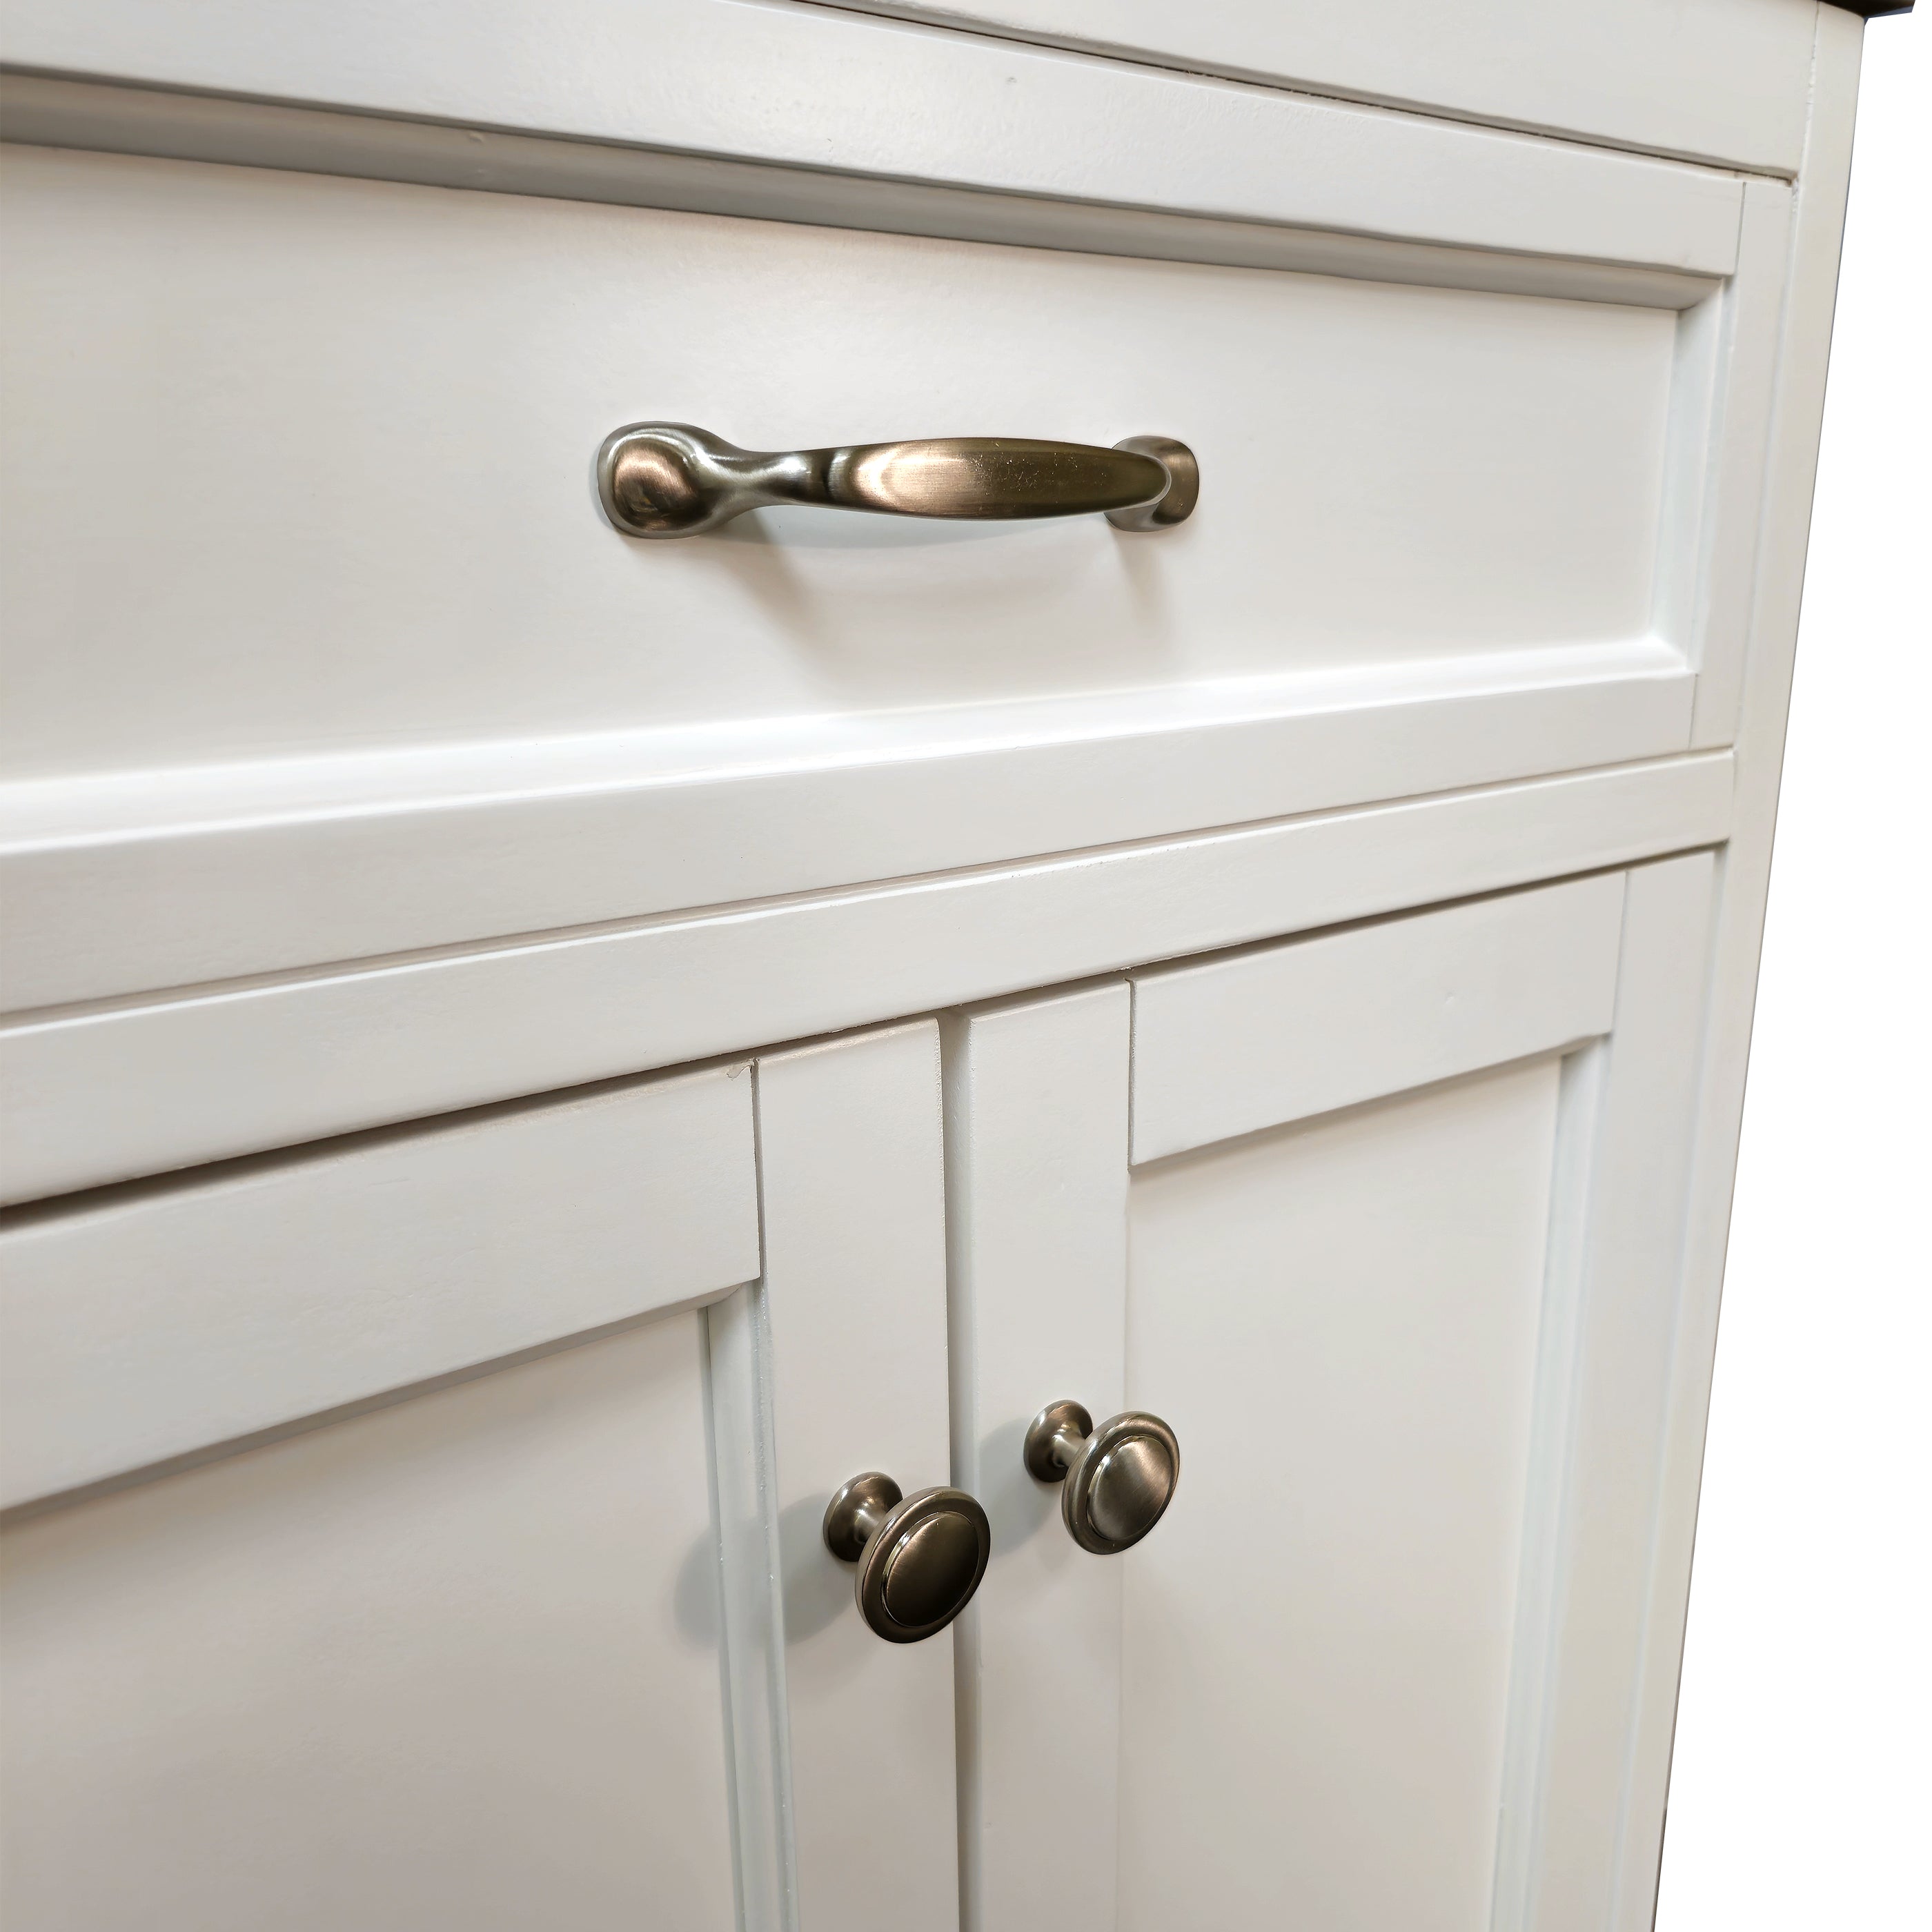 Addison Bathroom Vanity in White with Solid Wood & Carrara Marble Top - Available in 3 sizes